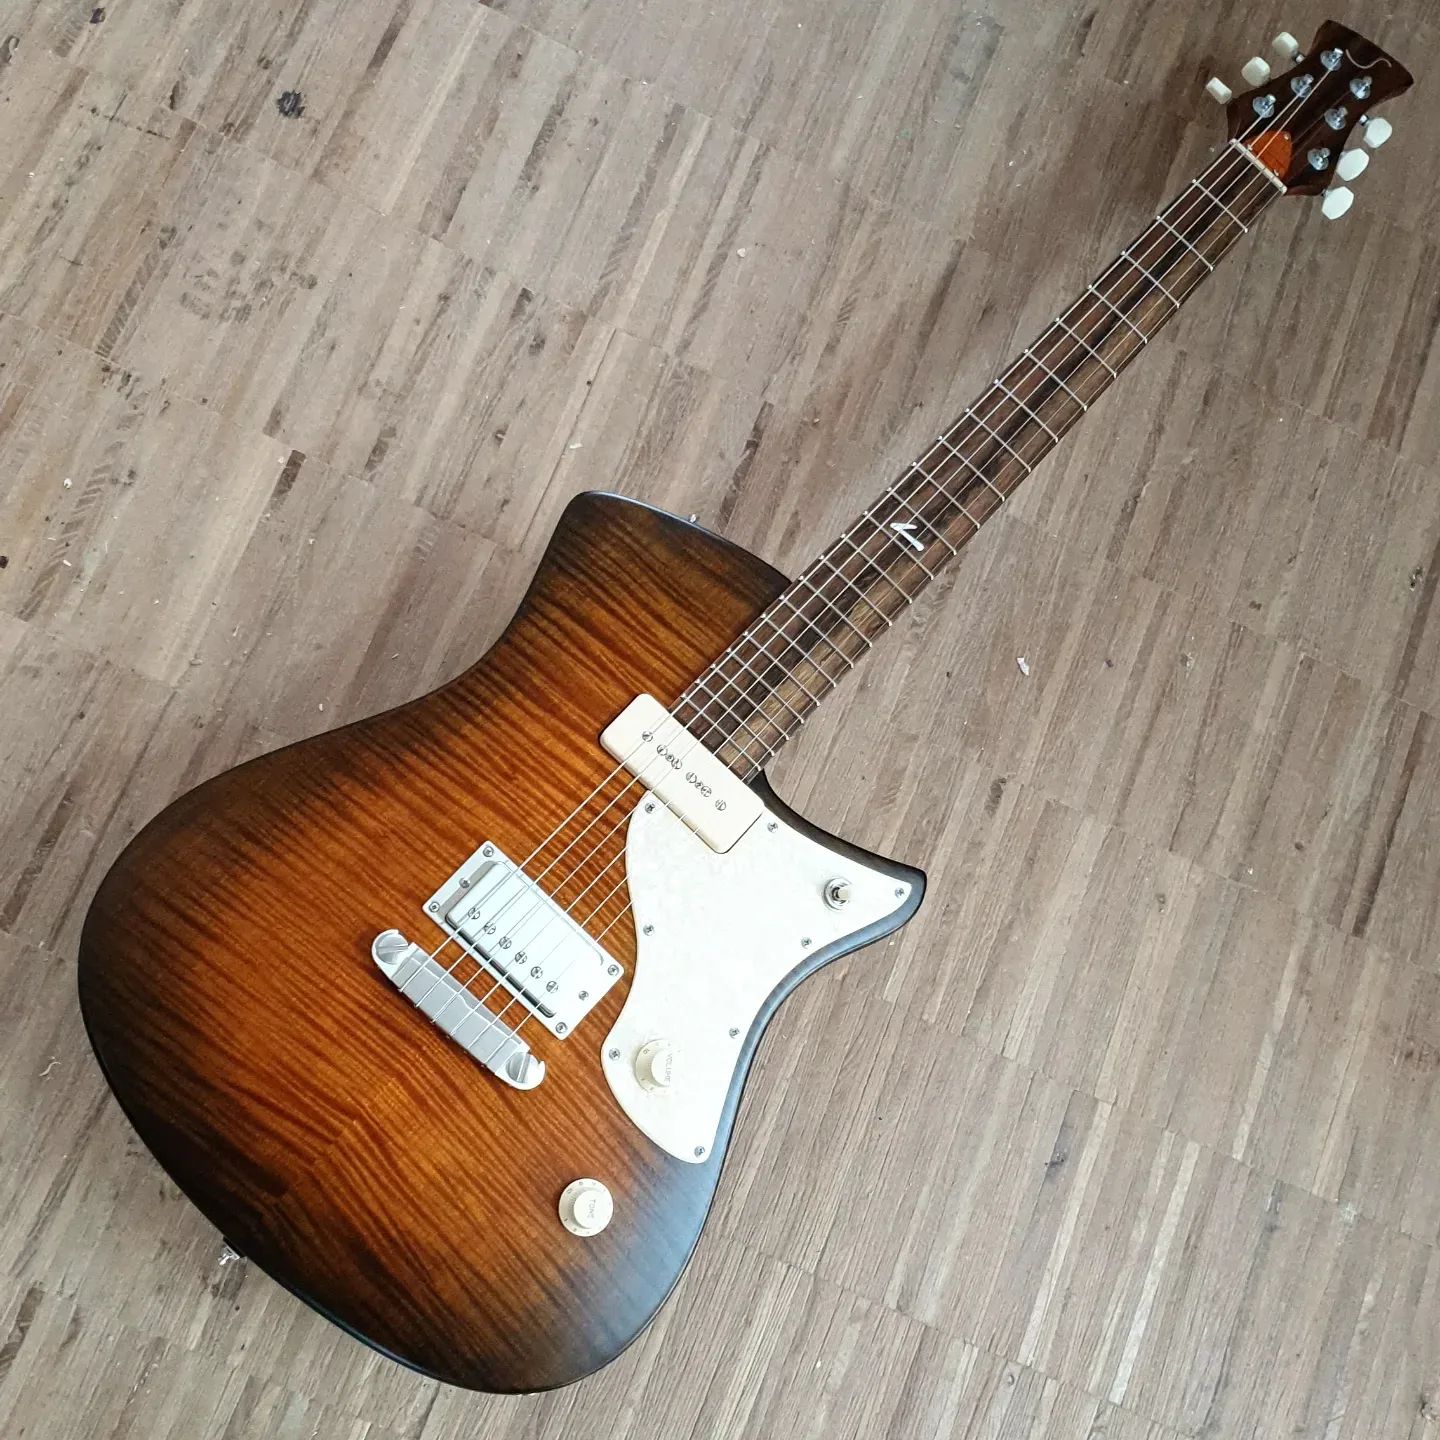 Laguz LX Custom, this time with strings…